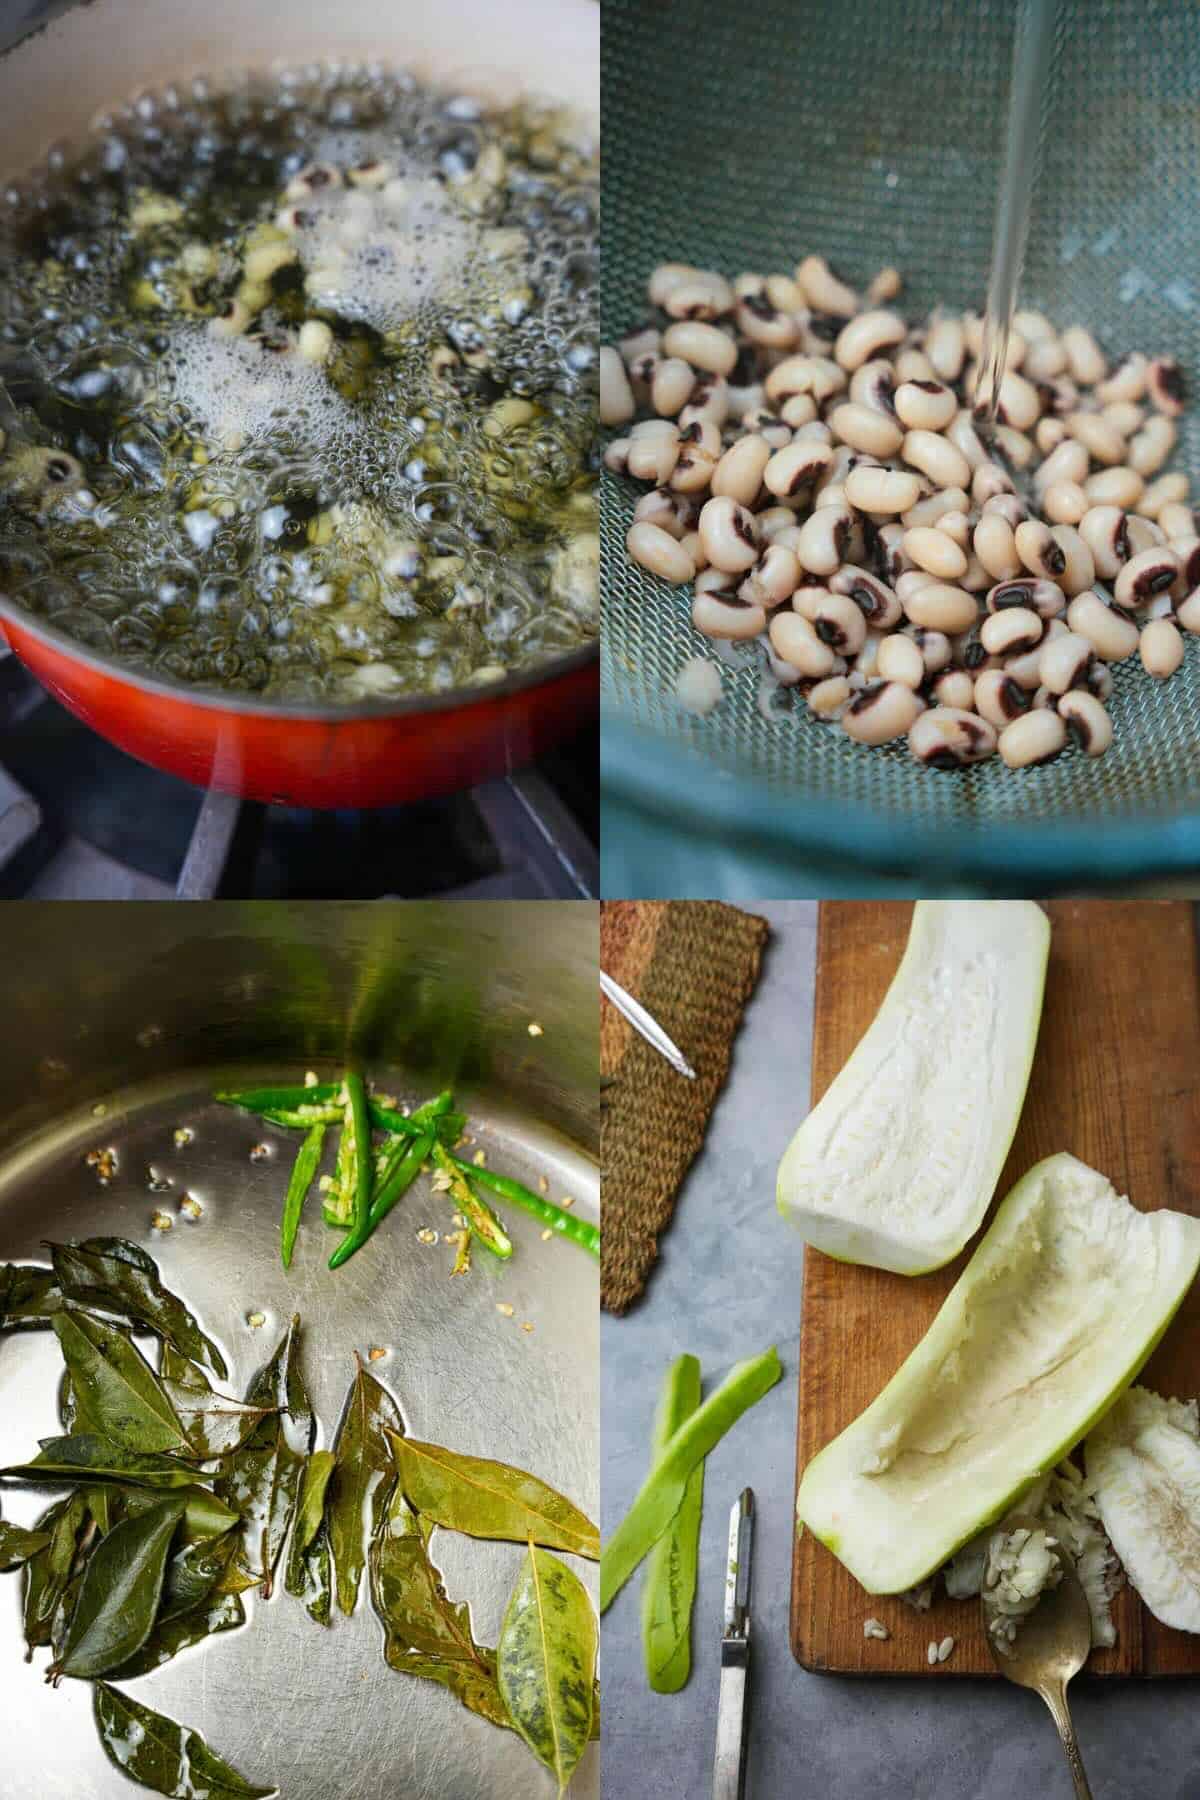 A collage of images showing how to make Olan, starting with boiling and rinsing of beans, frying of curry leaves and chilies, and gourd prep.